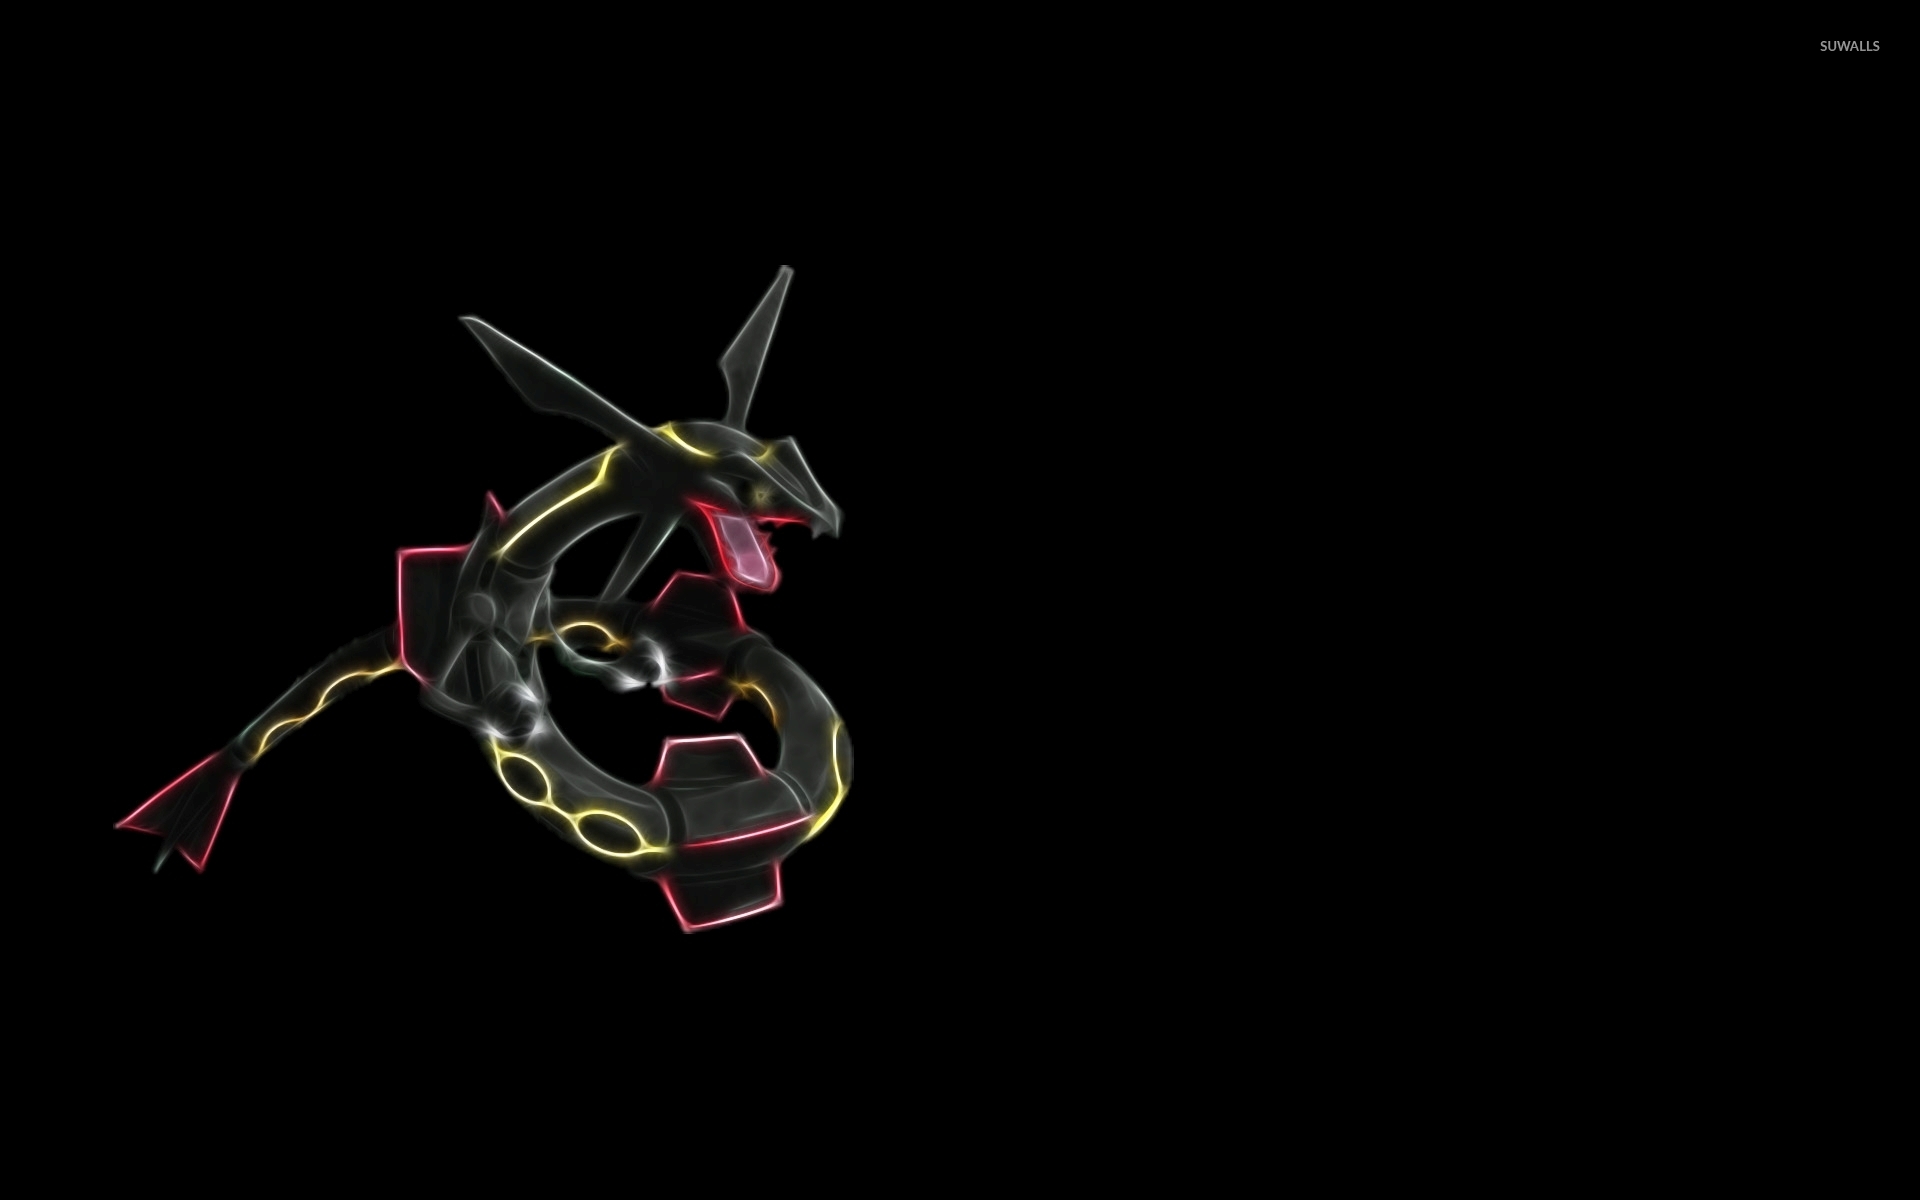 Rayquaza (Pokémon) wallpapers for desktop, download free Rayquaza (Pokémon)  pictures and backgrounds for PC